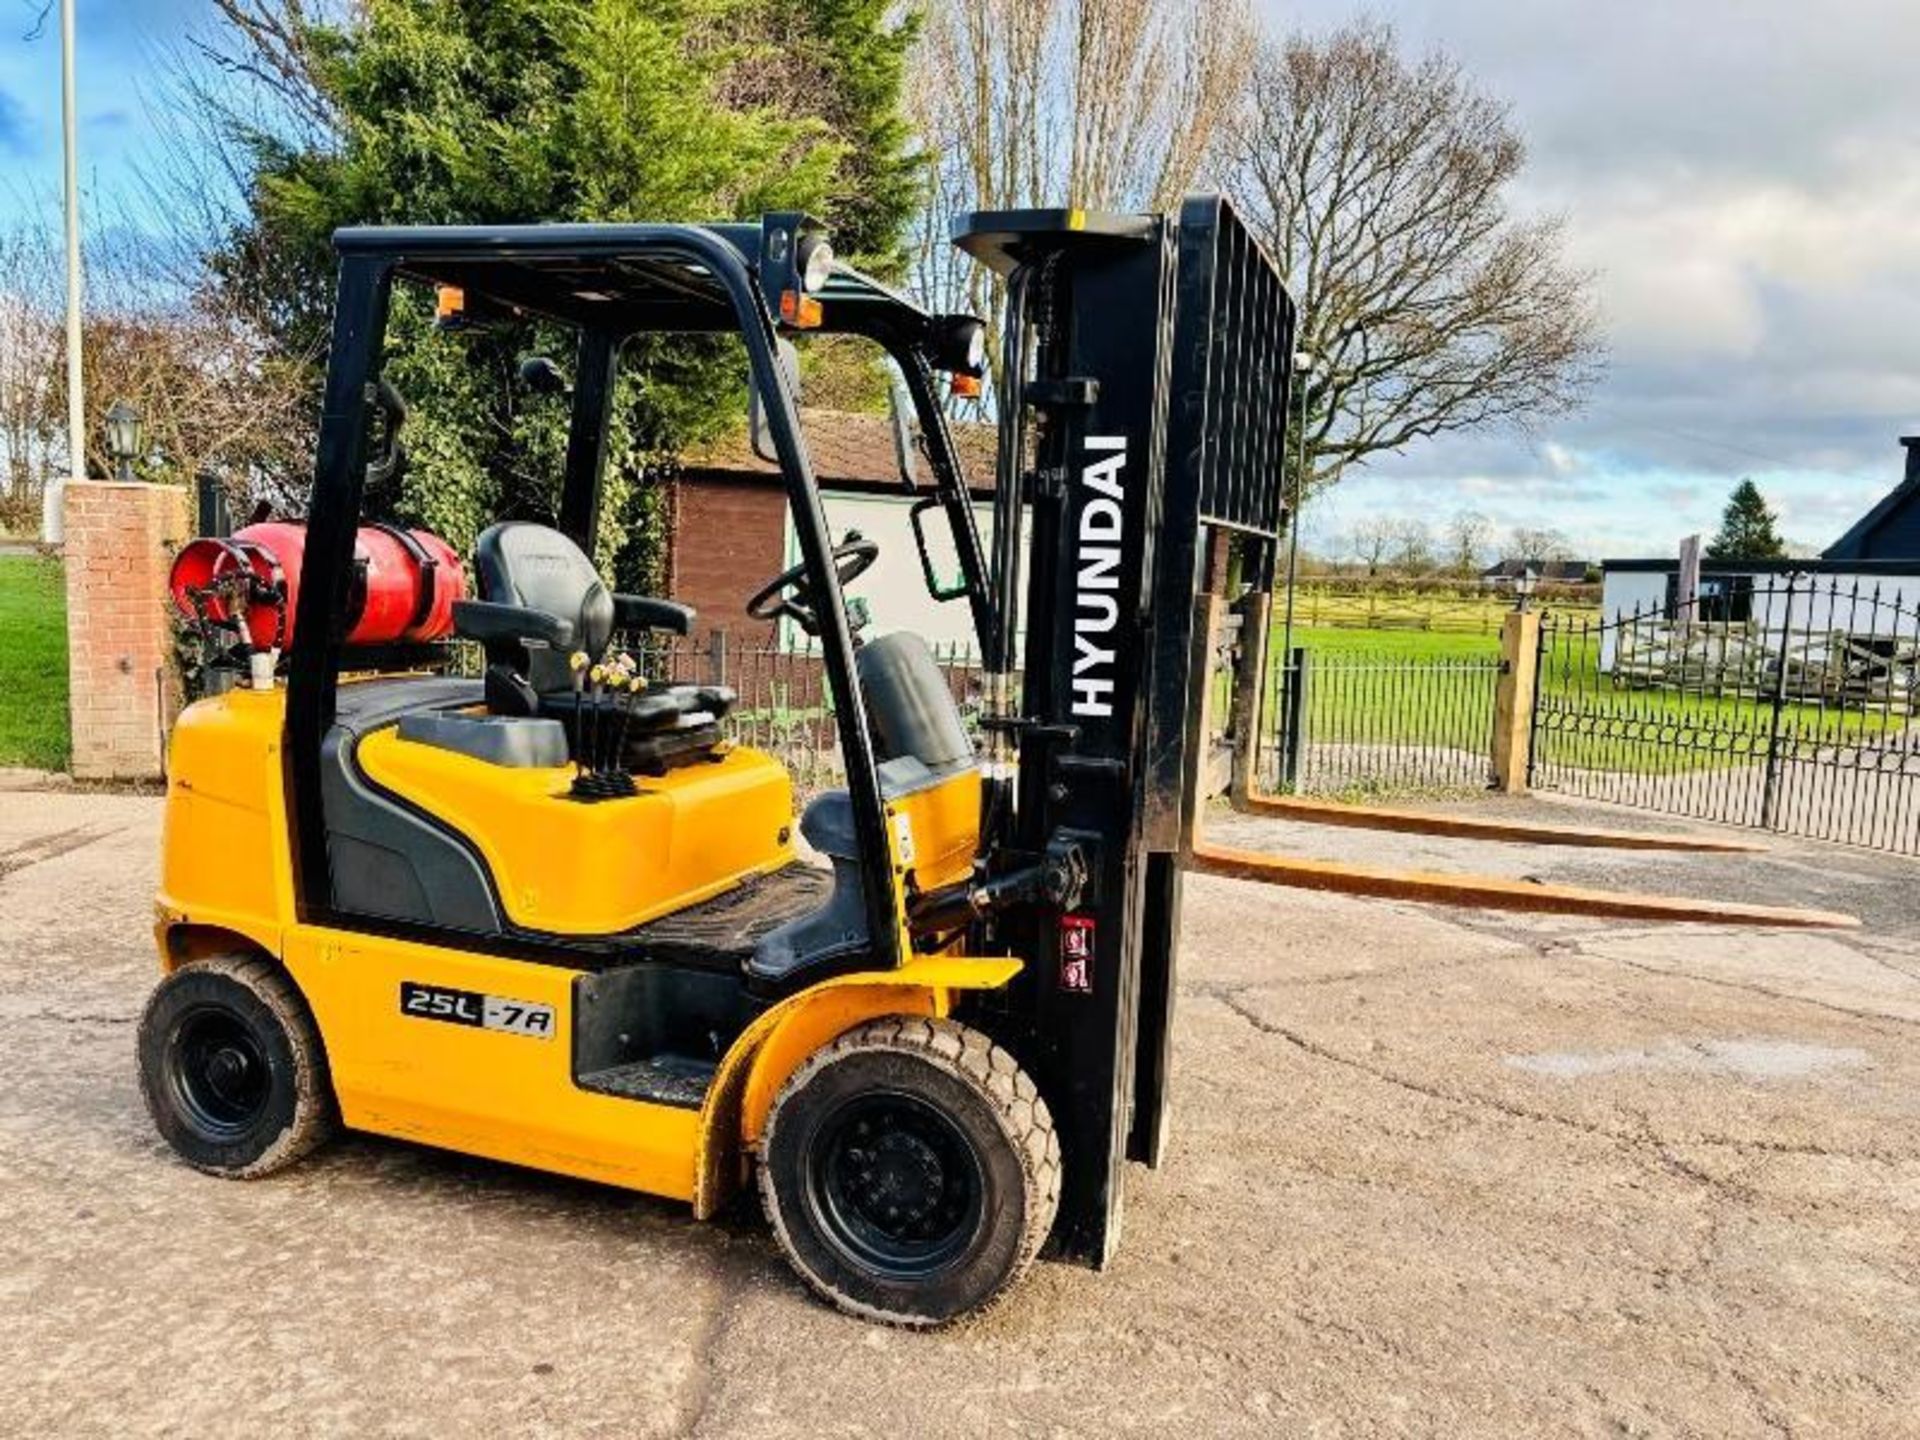 HYUNDAI 25L-7A CONTAINER SPEC FORKLIFT *YEAR 2018, 2172 HOURS* C/W SIDE SHIFT - Image 7 of 17